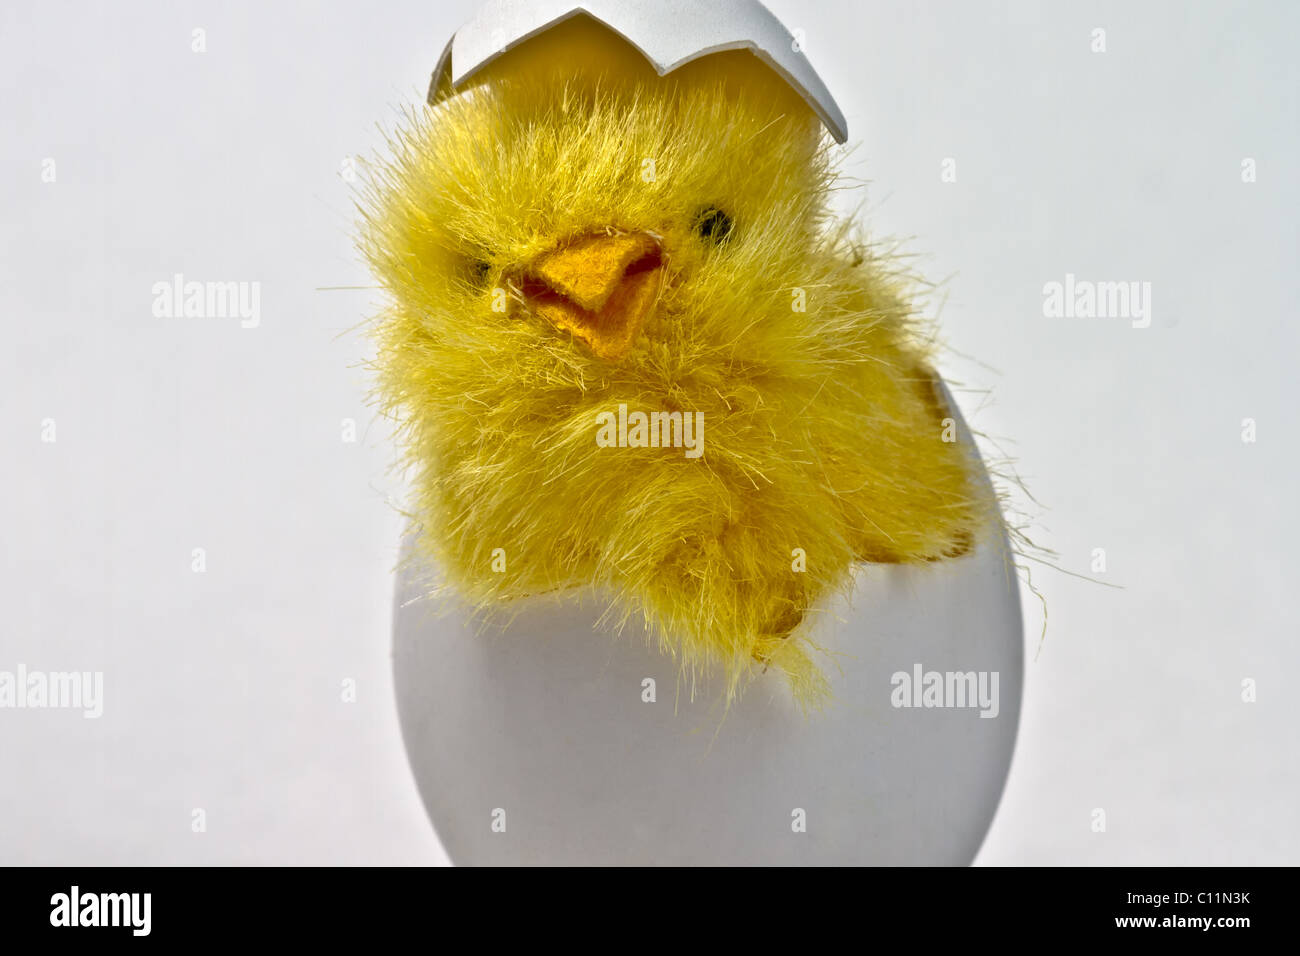 Newly hatched toy easter chicken in its eggshell, isolated on white Stock Photo